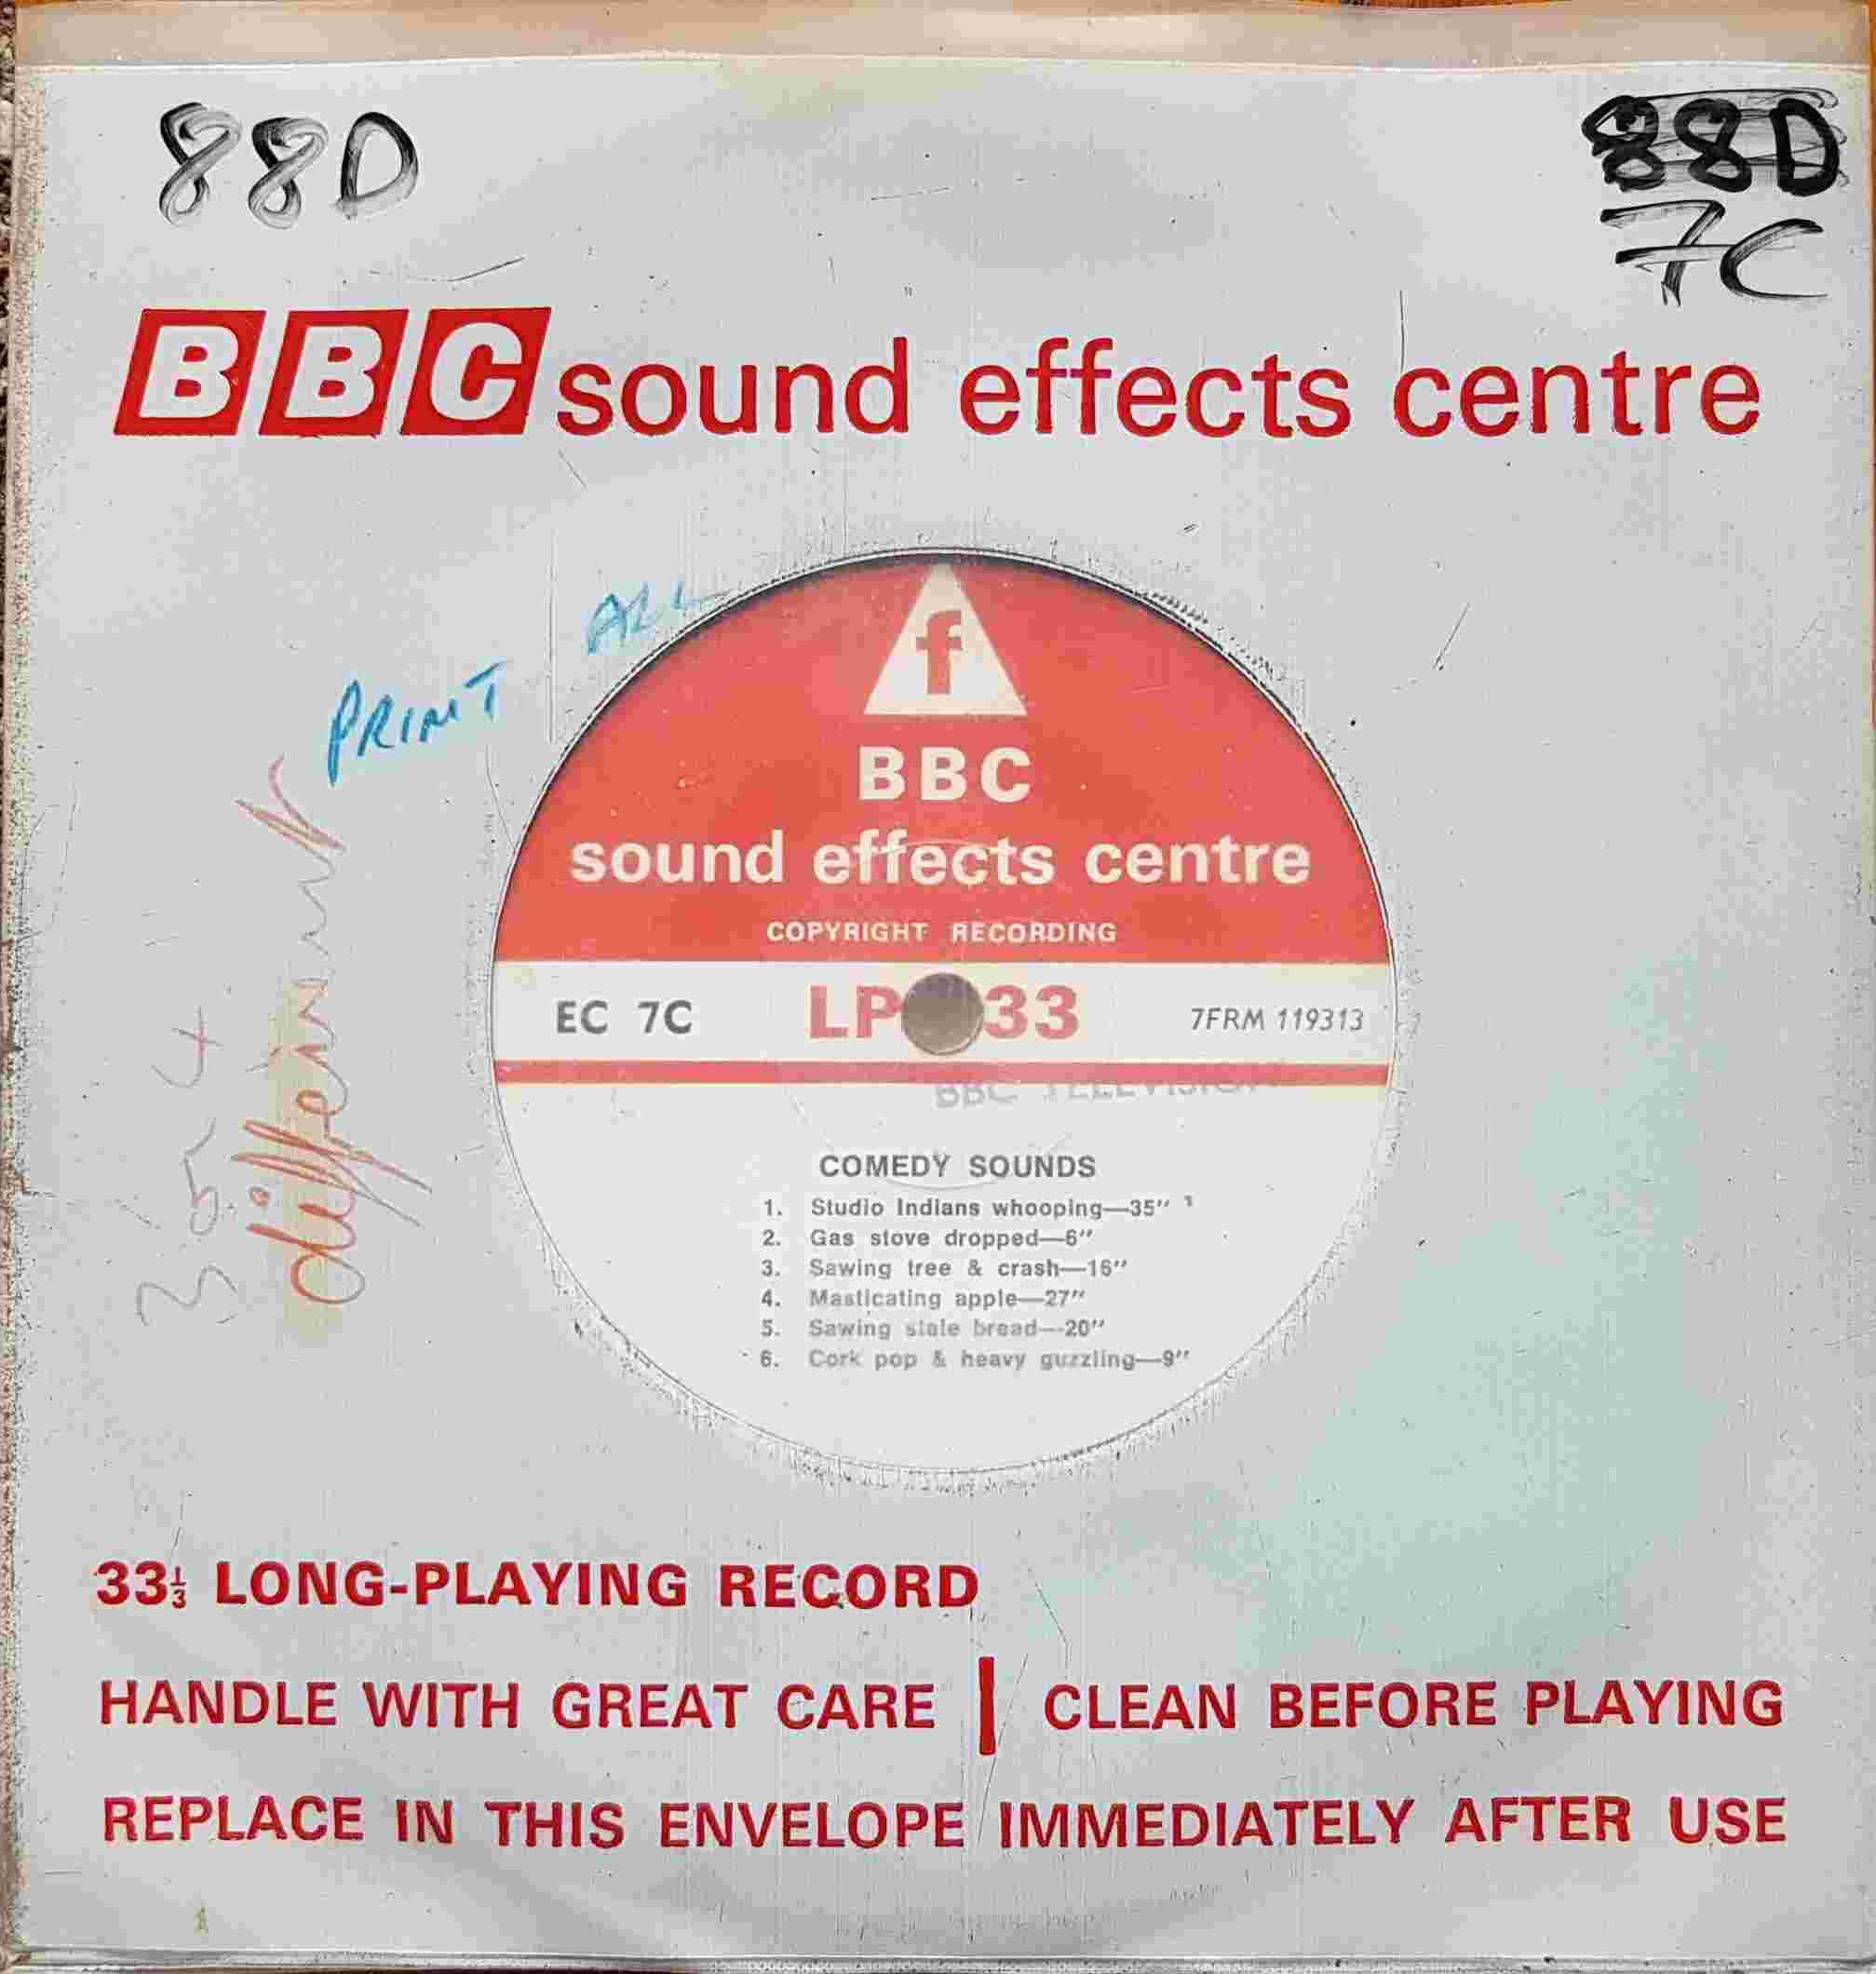 Picture of EC 7C Comedy sounds by artist Not registered from the BBC singles - Records and Tapes library